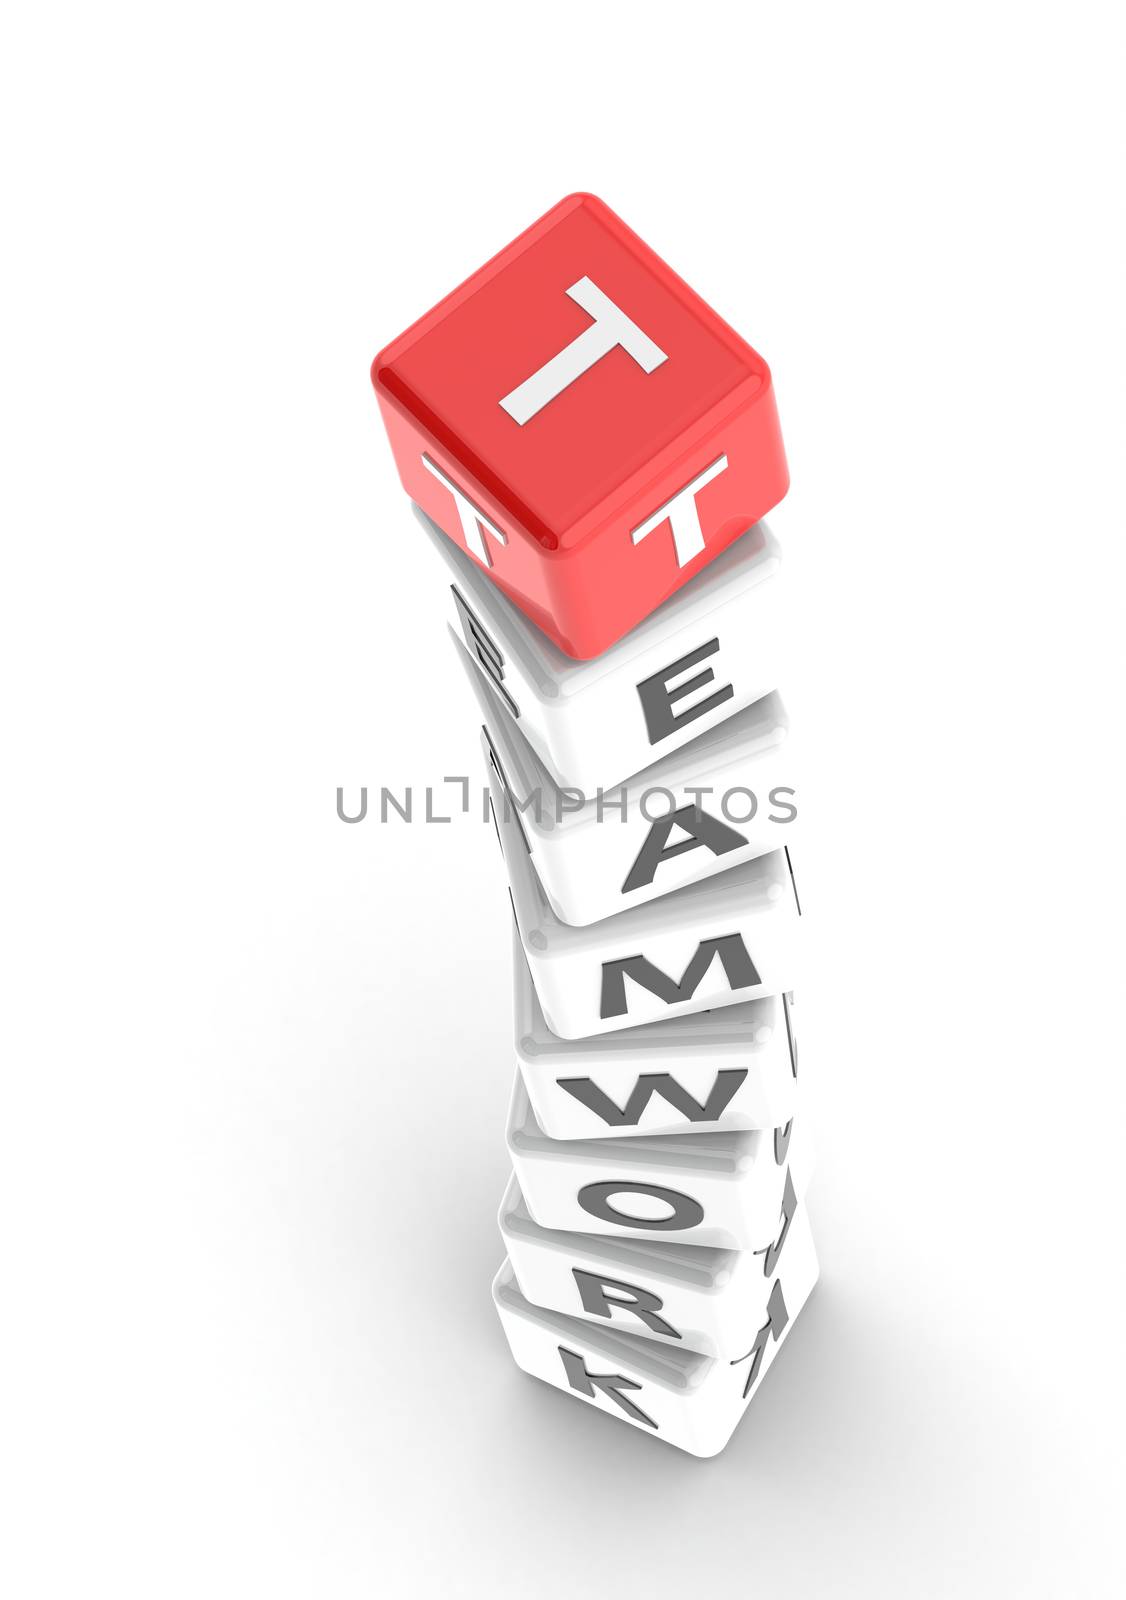 Teamwork puzzle word image with hi-res rendered artwork that could be used for any graphic design.